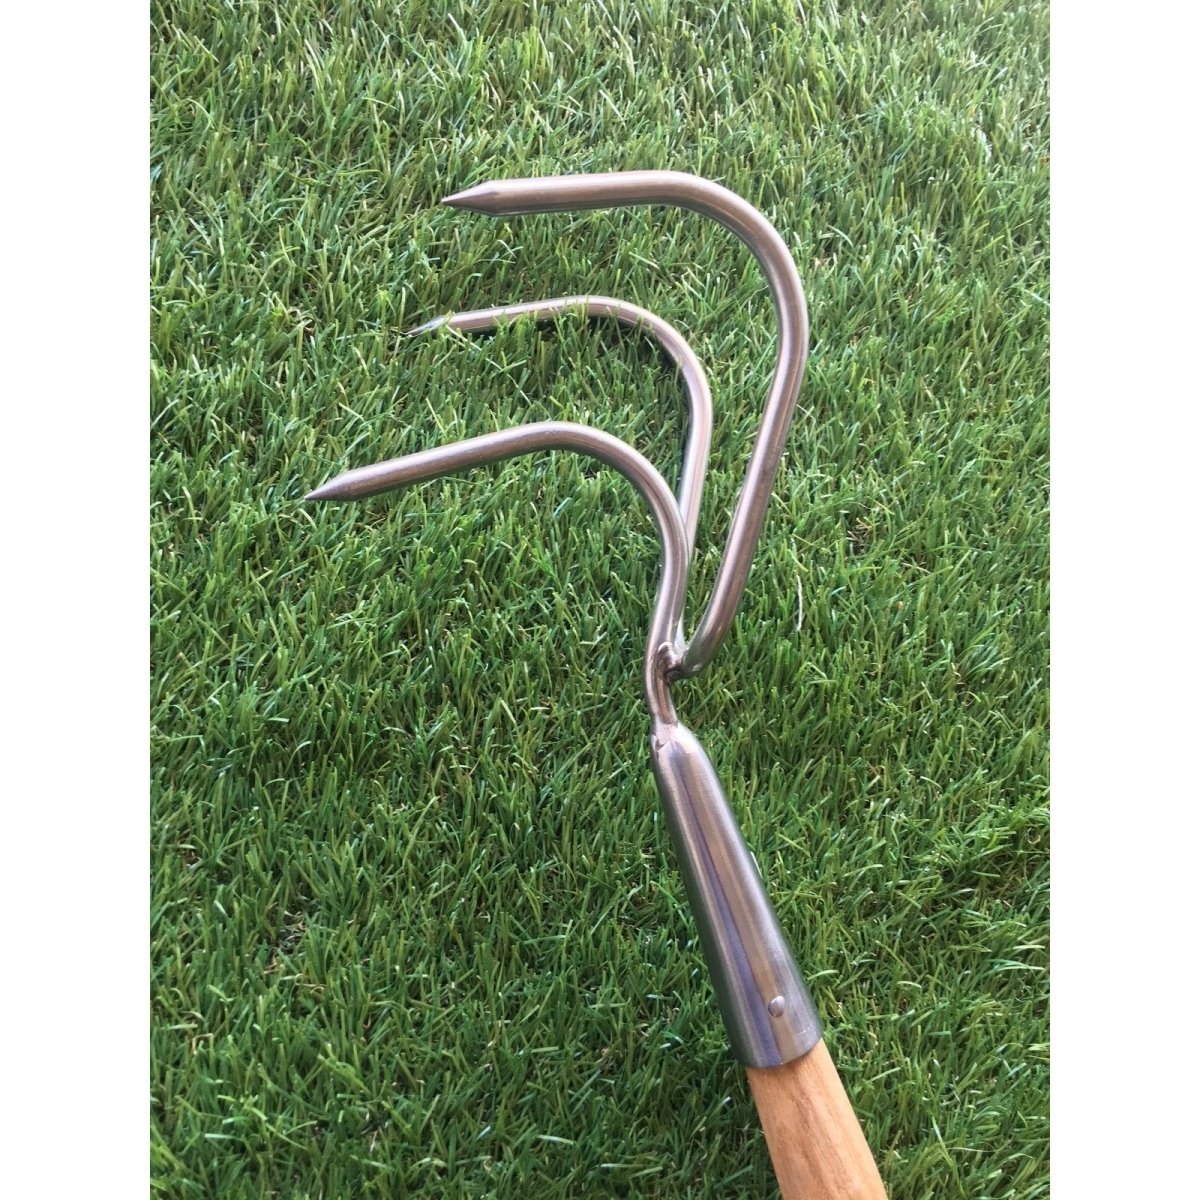 Stainless Steel Long Reach Cultivator